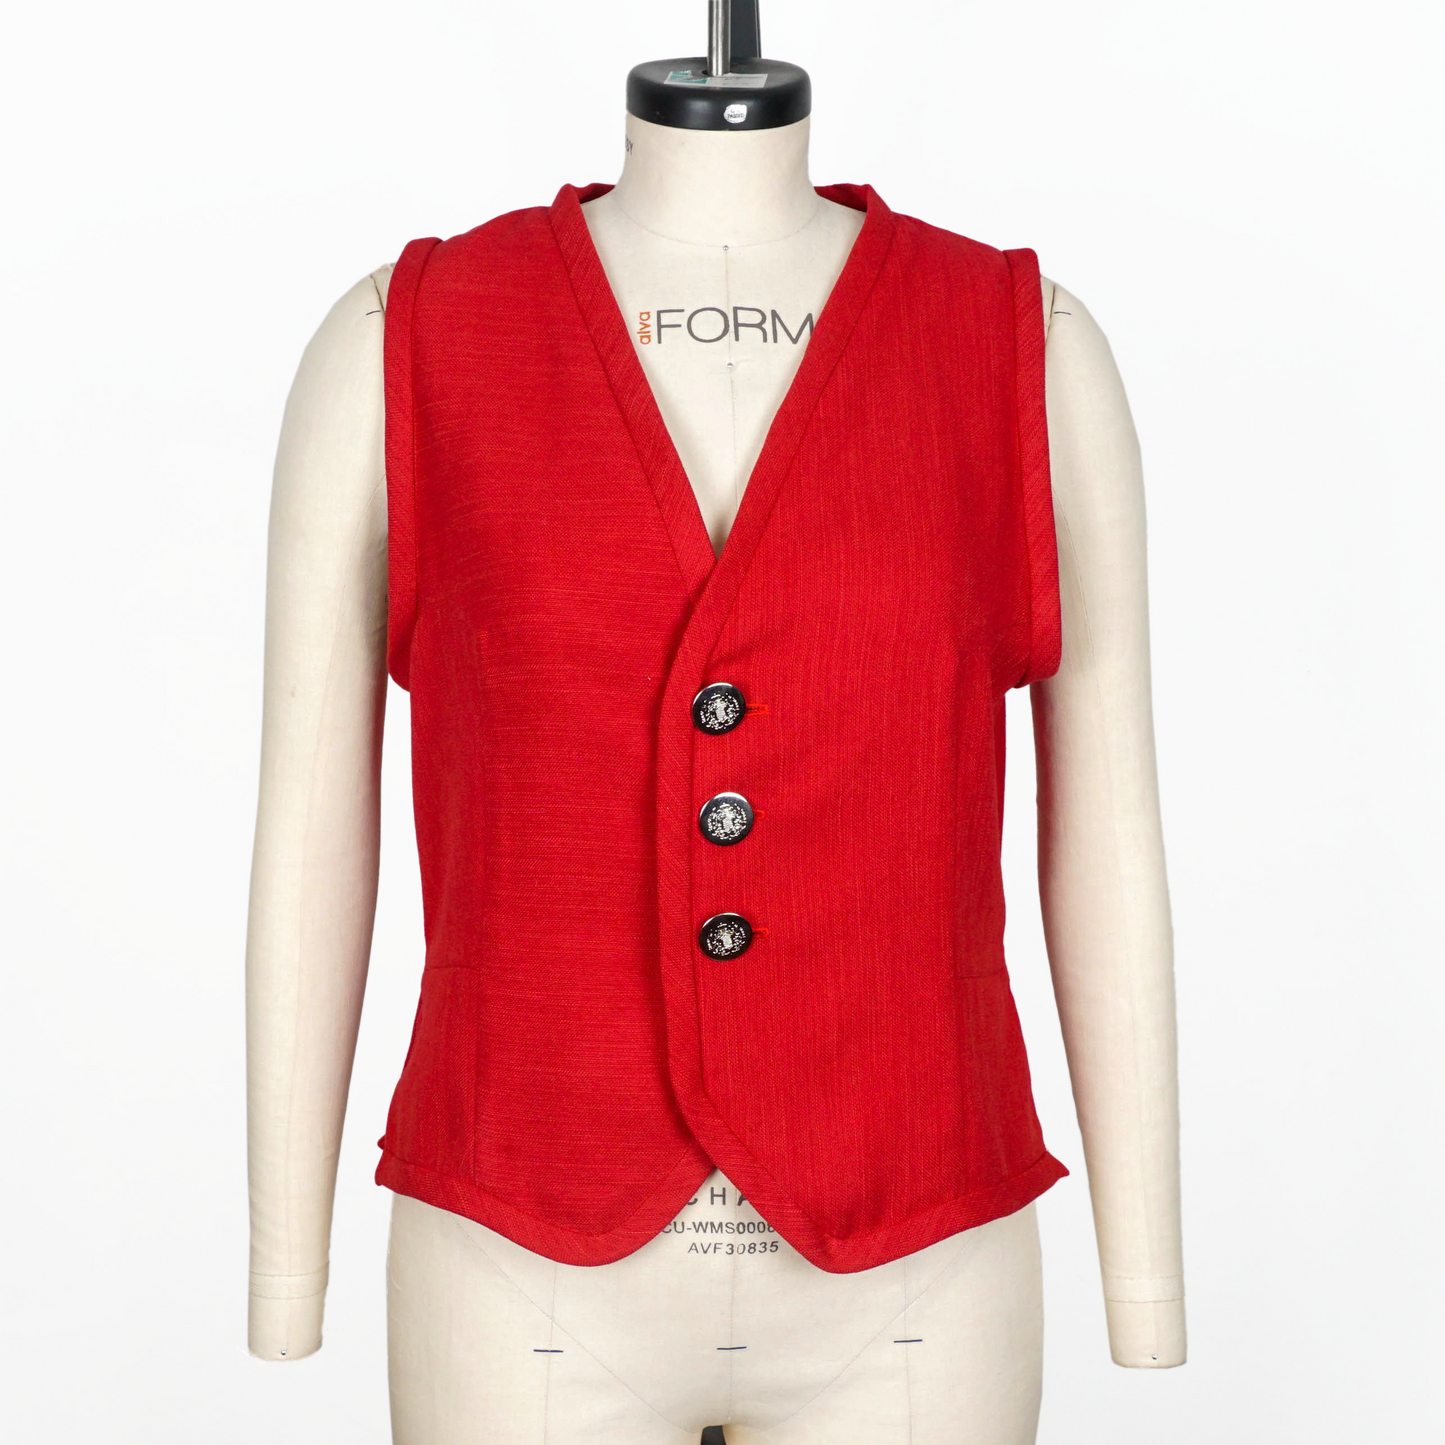 Simple Pirate Vest Sewing Pattern/Downloadable PDF and Tutorial Book